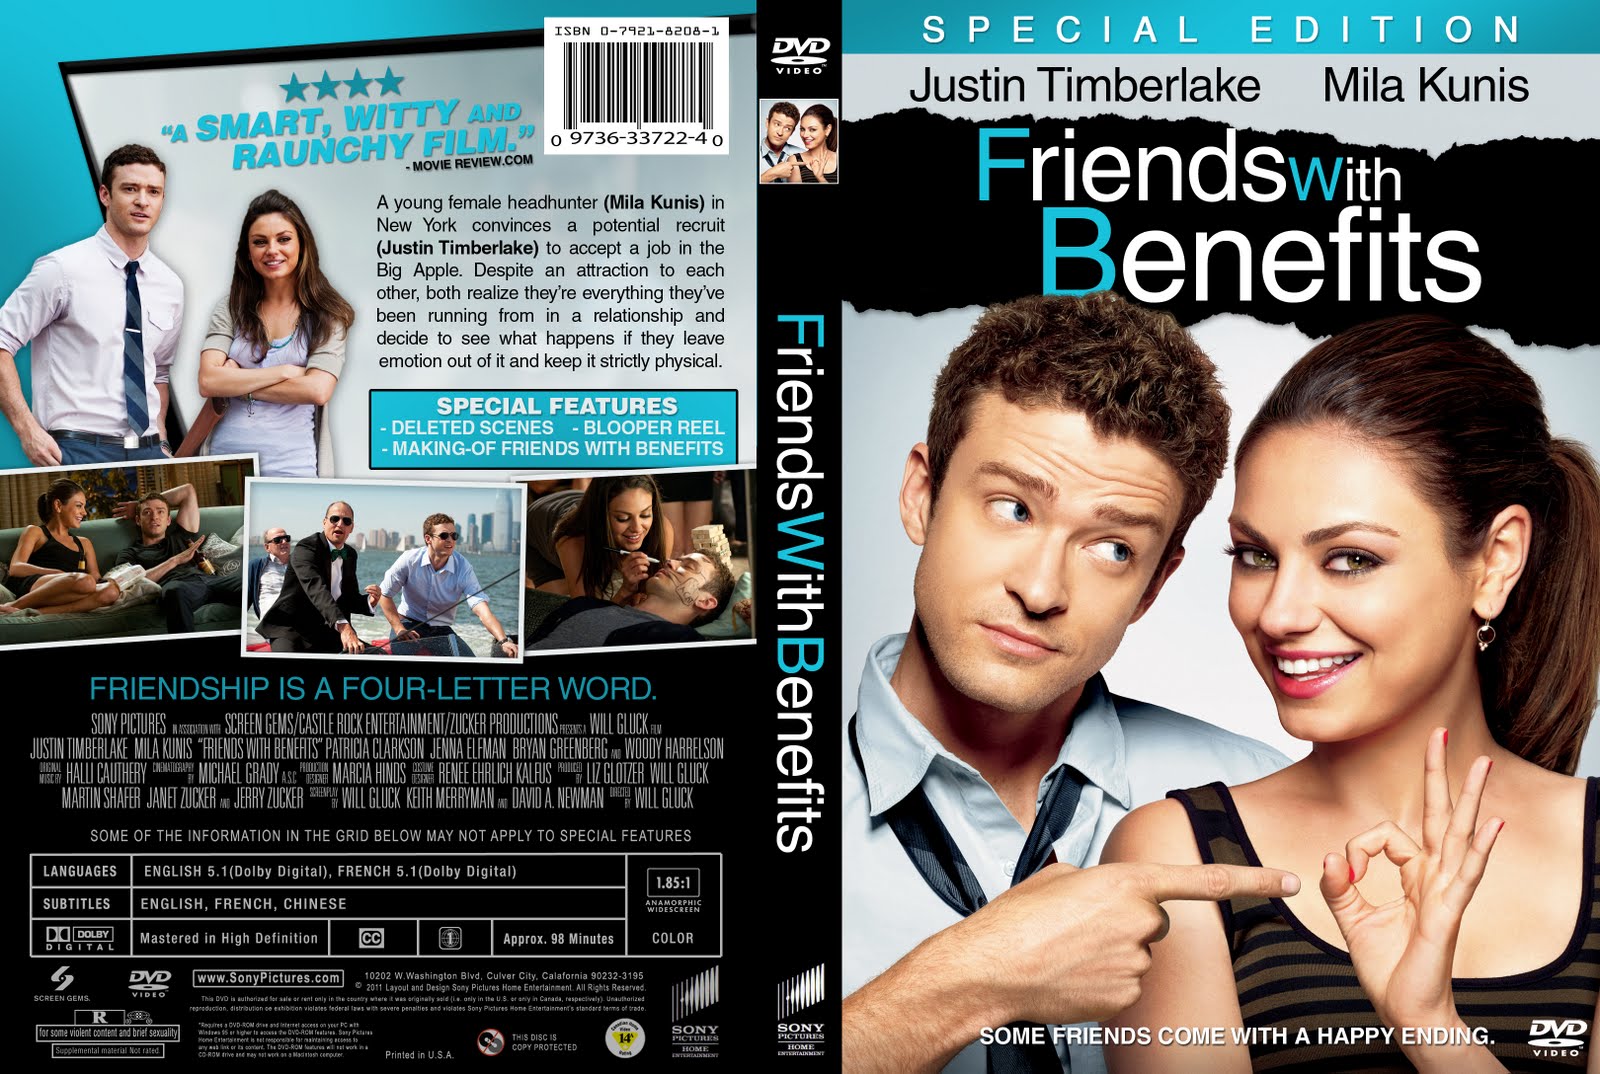 How to make DVD cover with Standard DVD Cover template?